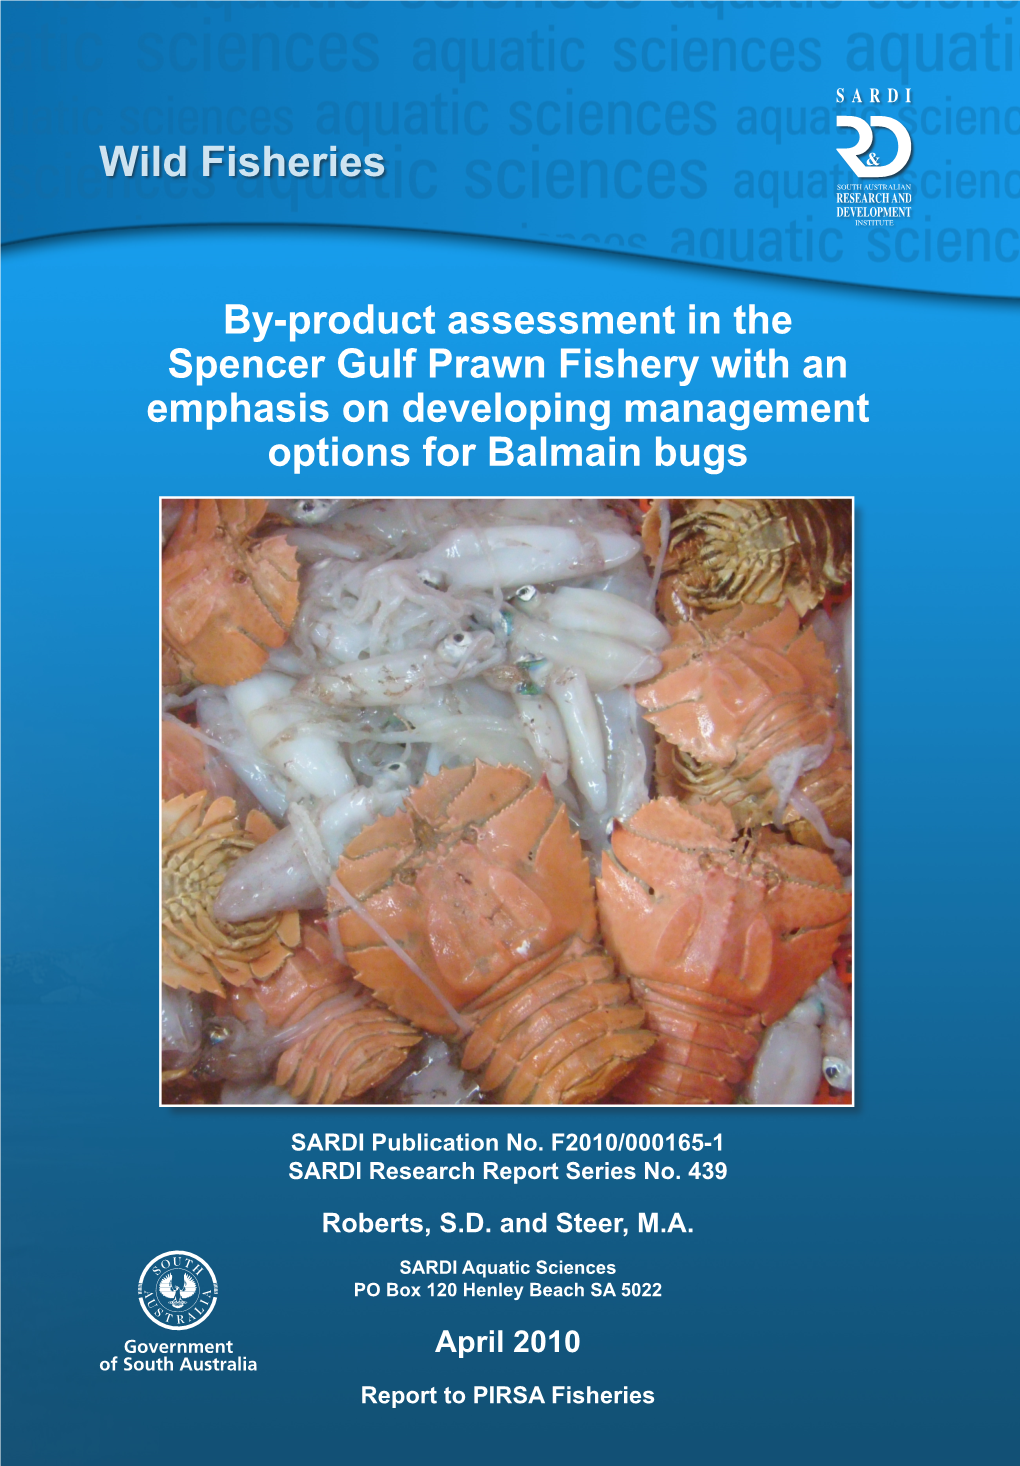 By-Product Assessment in the Spencer Gulf Prawn Fishery with an Emphasis on Developing Management Options for Balmain Bugs